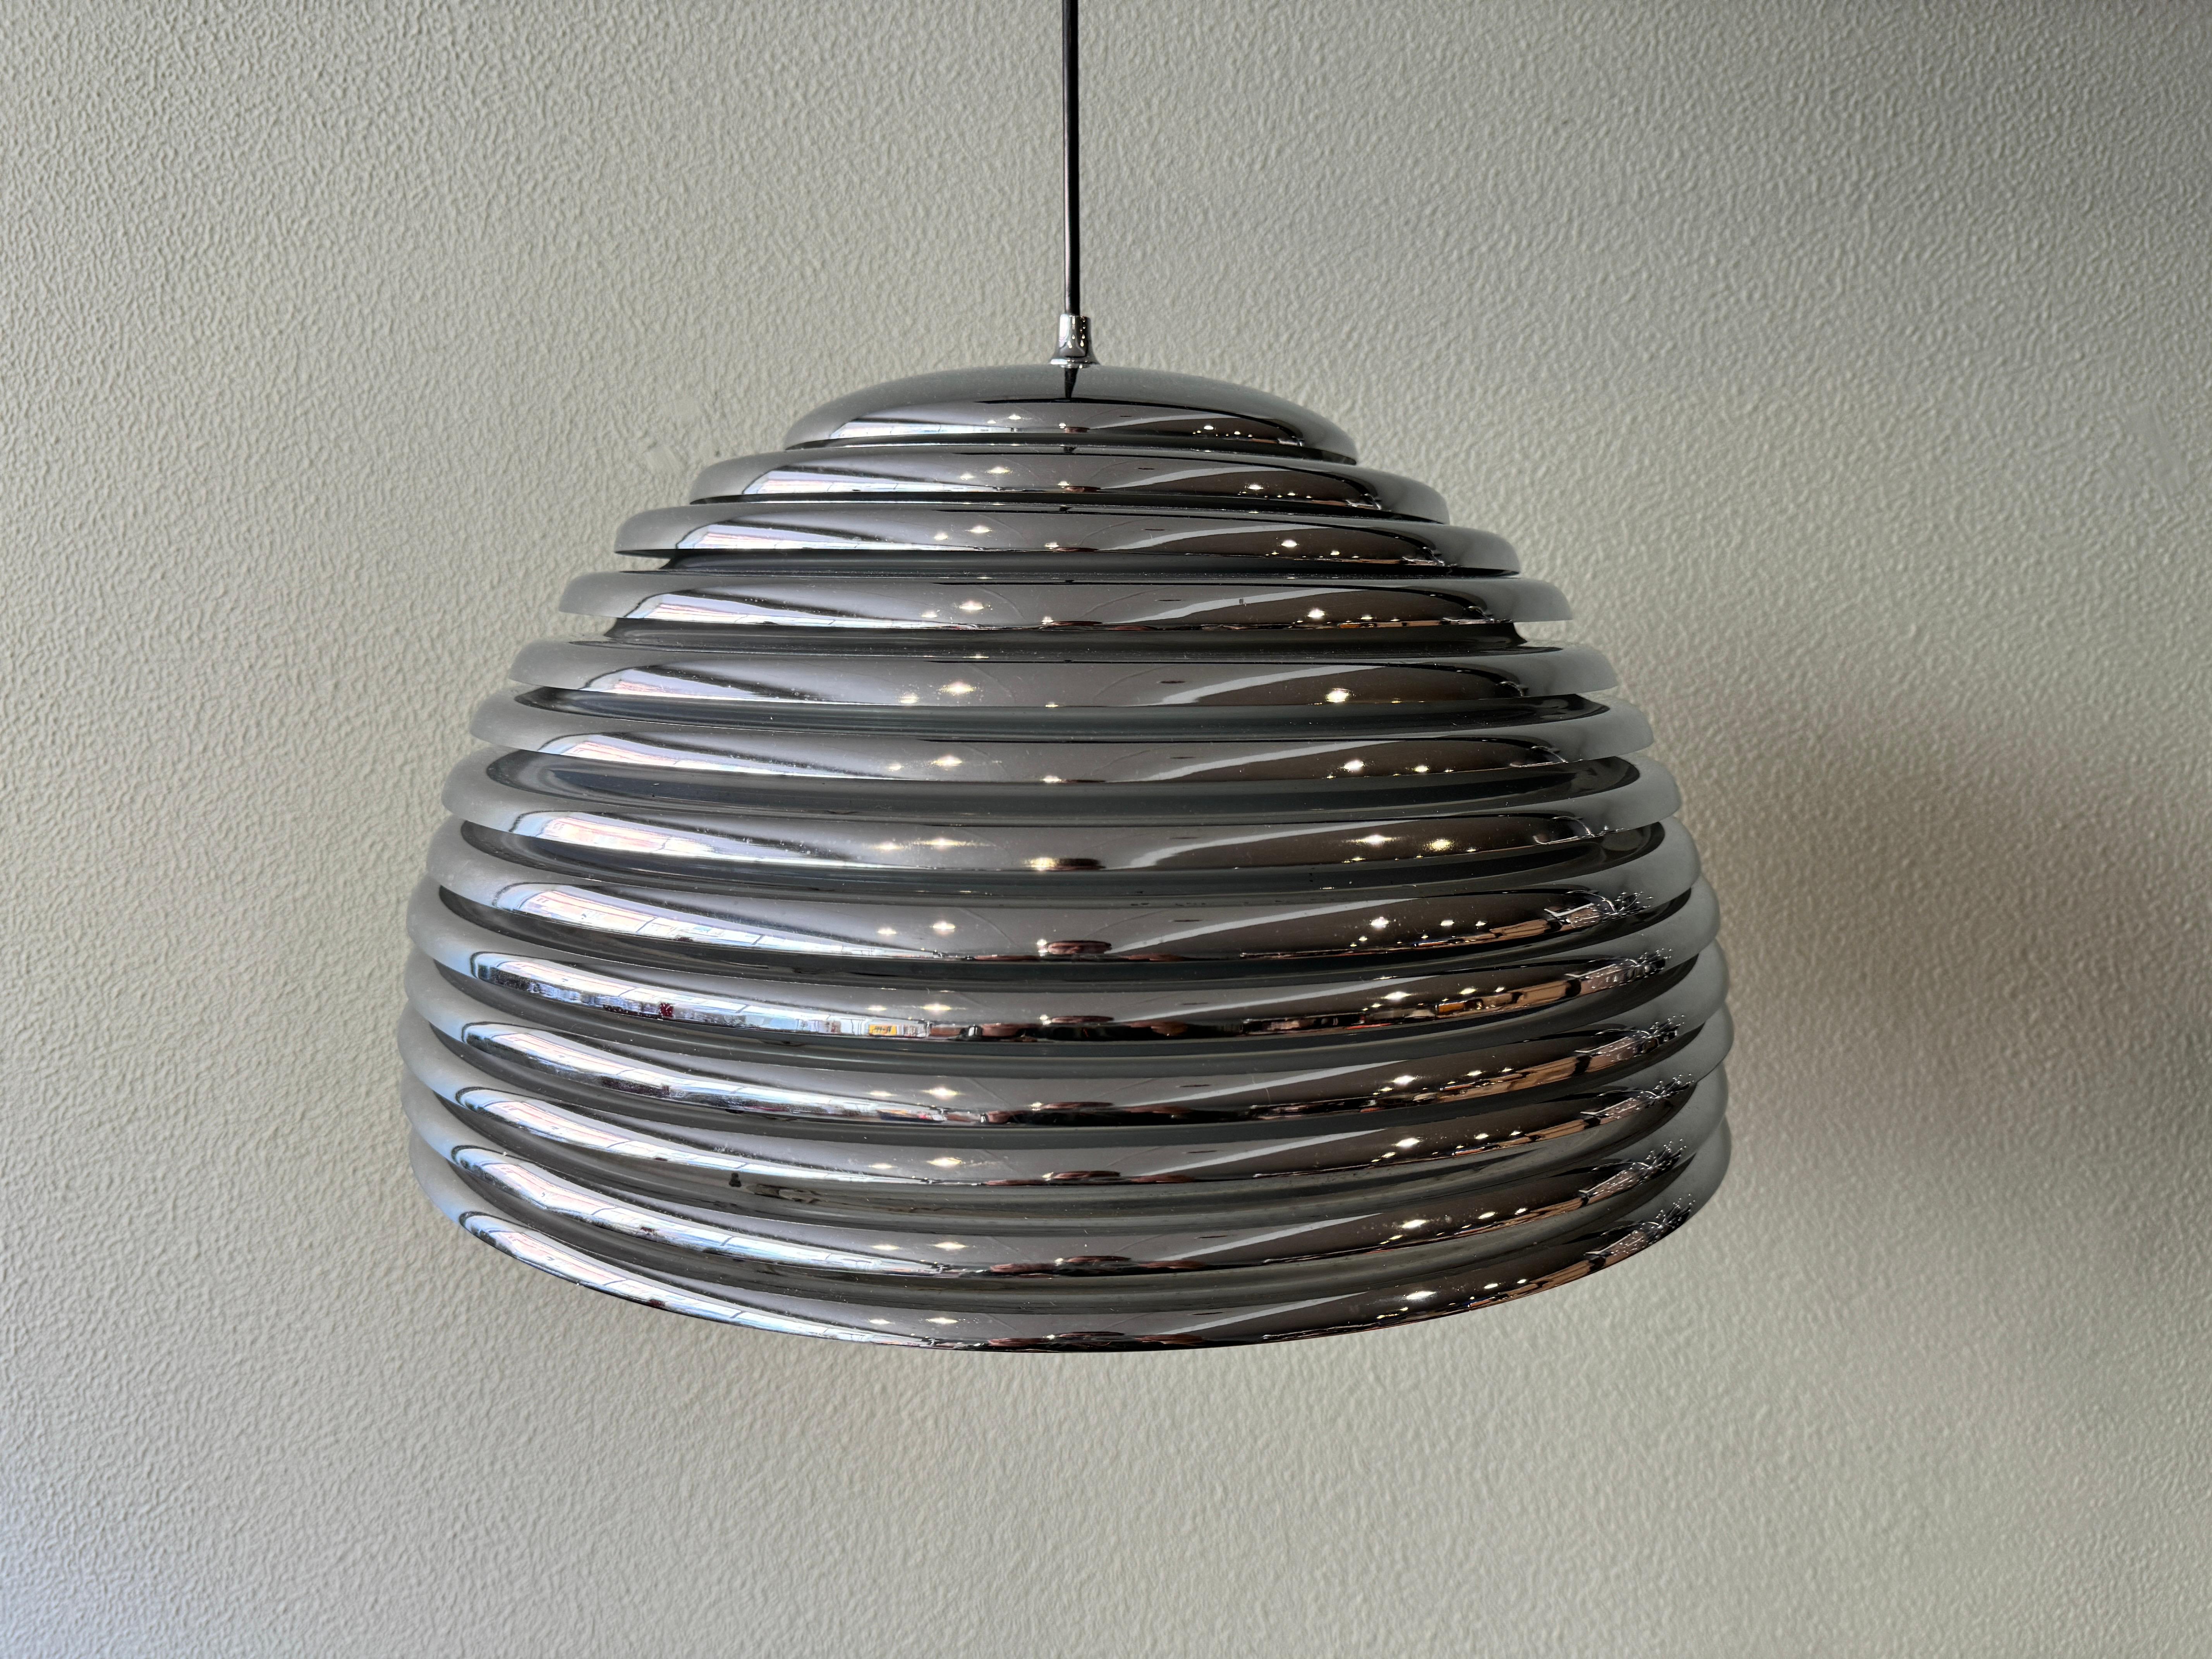 Introducing the Saturno Pendant Lamp by Kazuo Motozawa, a vintage piece from the 1970's designed for Staff Leuchten in Germany. This lamp is made of chrome-plated steel and has a 30 cm height and 50 cm diameter chromed metal shade with 13 round